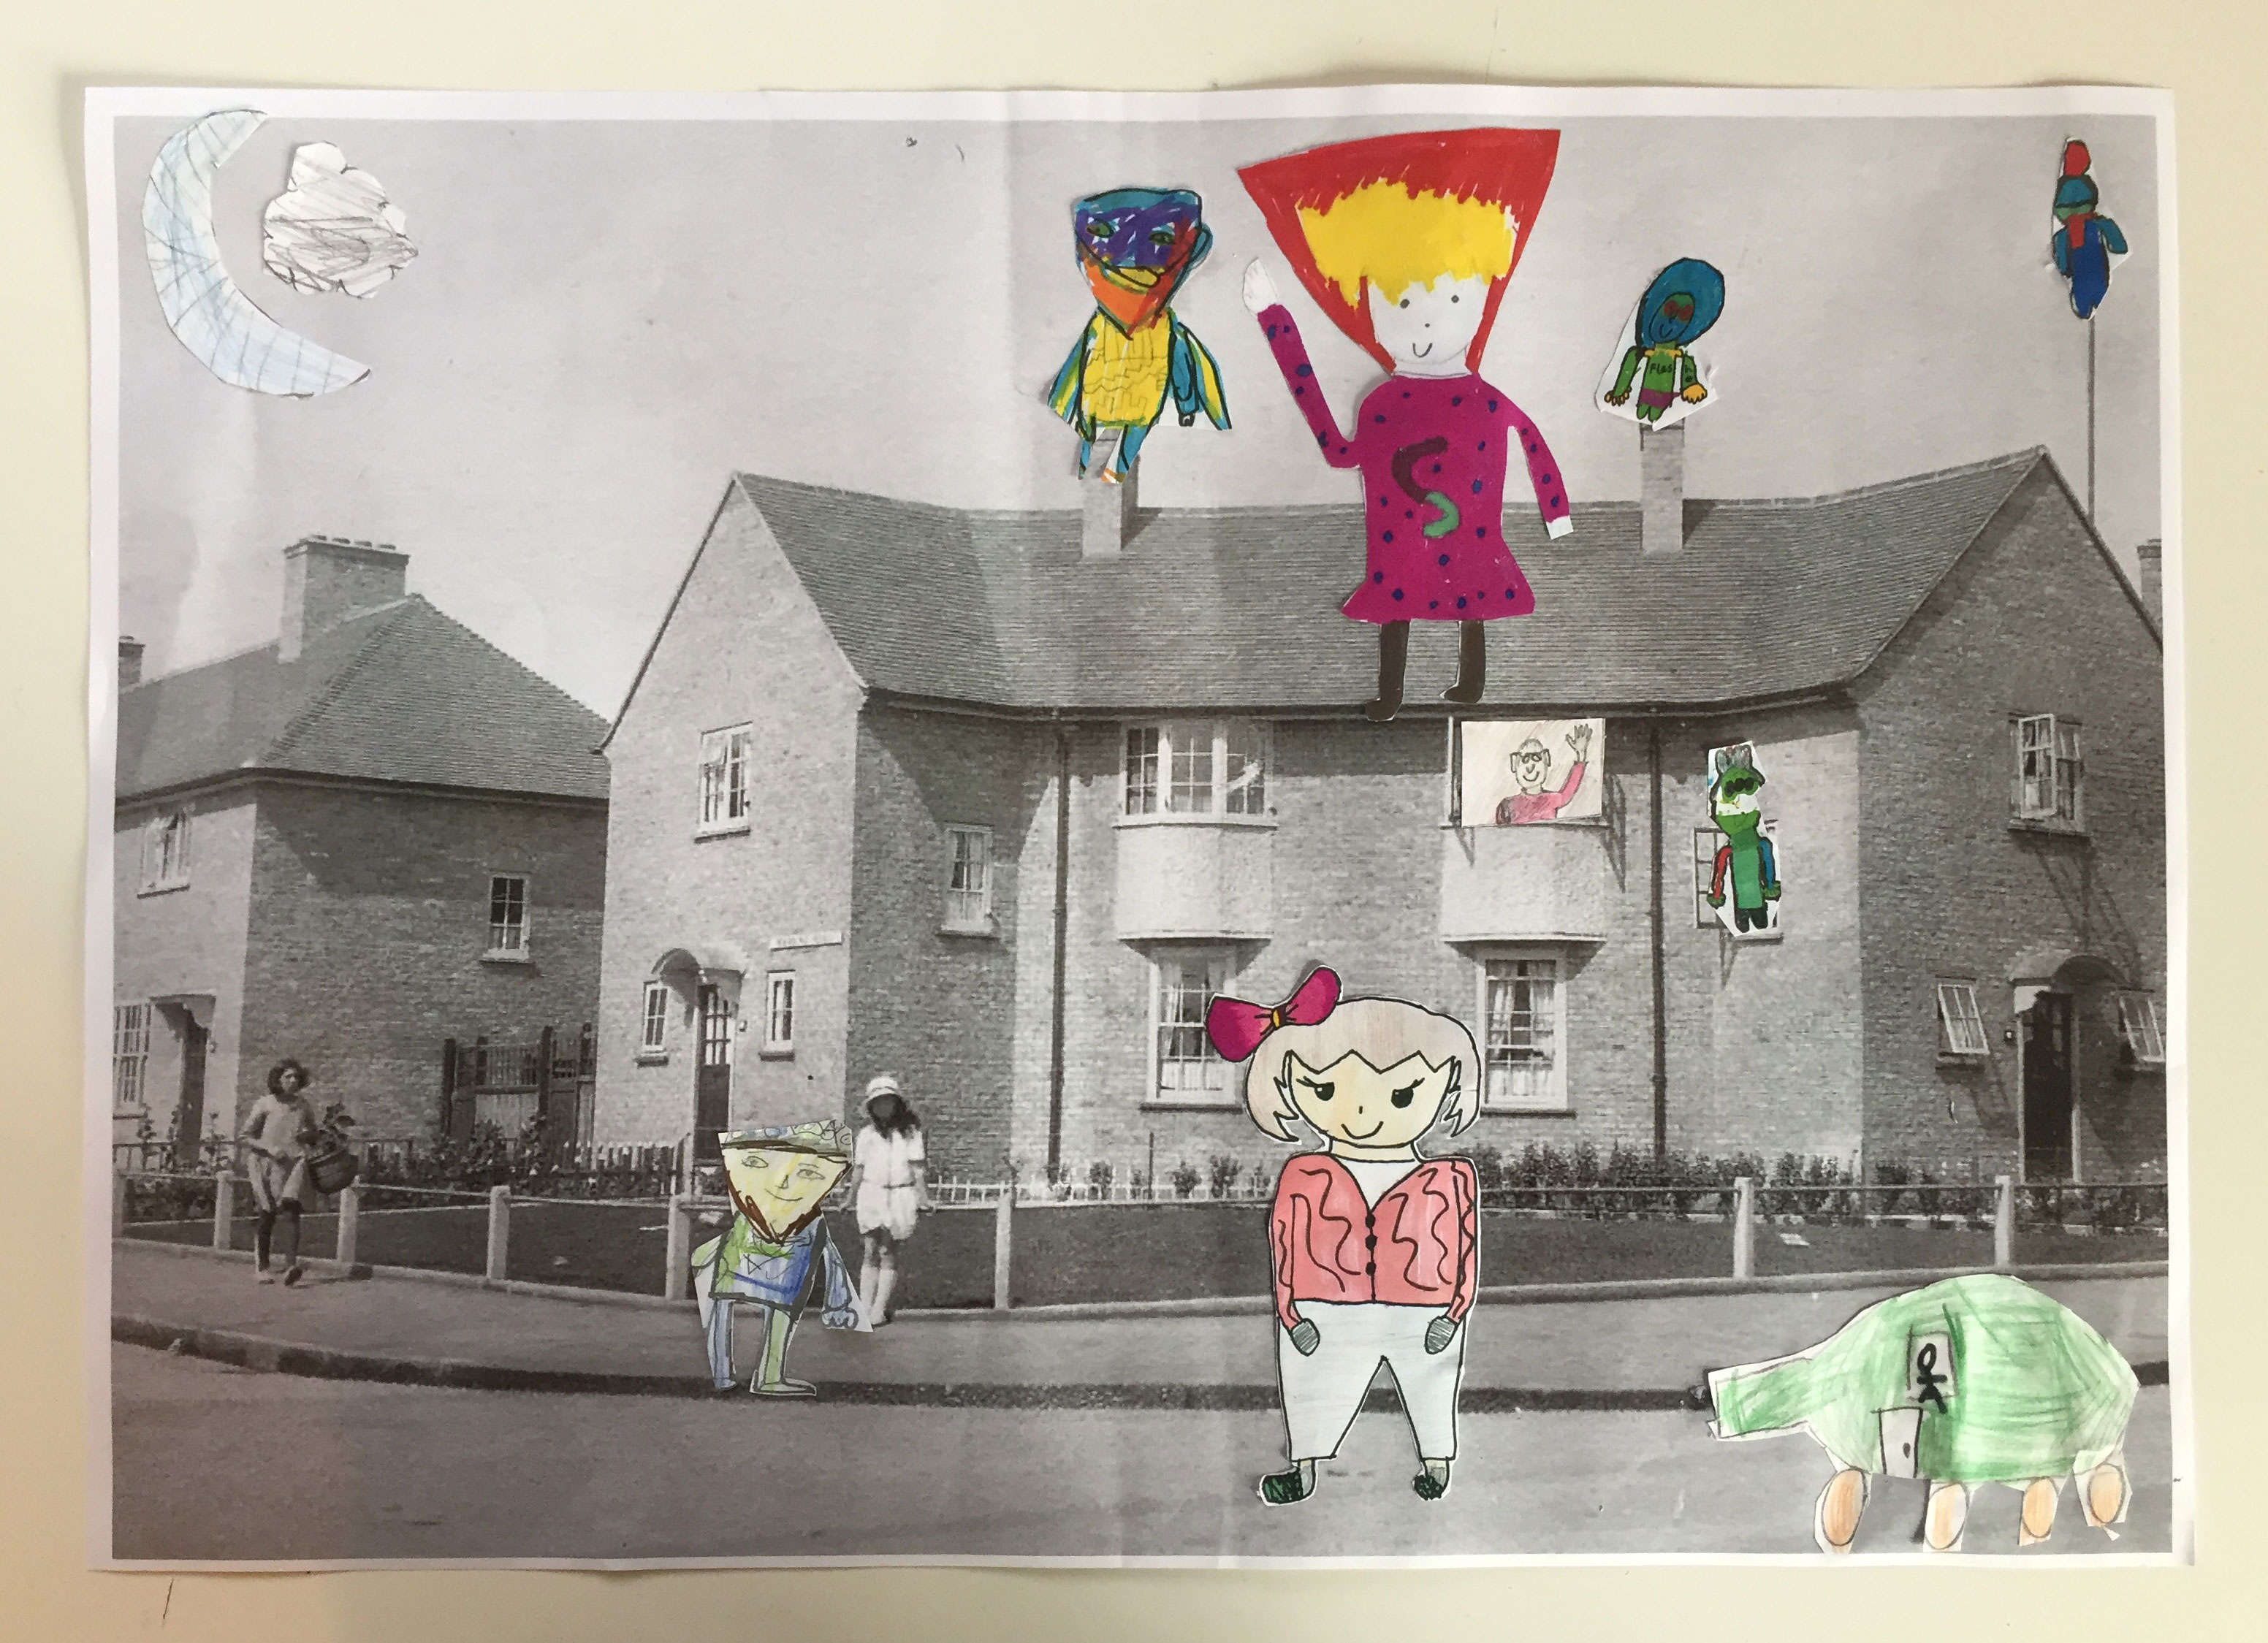 A collage of people and shapes drawn by the participants and placed on top of an old black and white photograph of a house